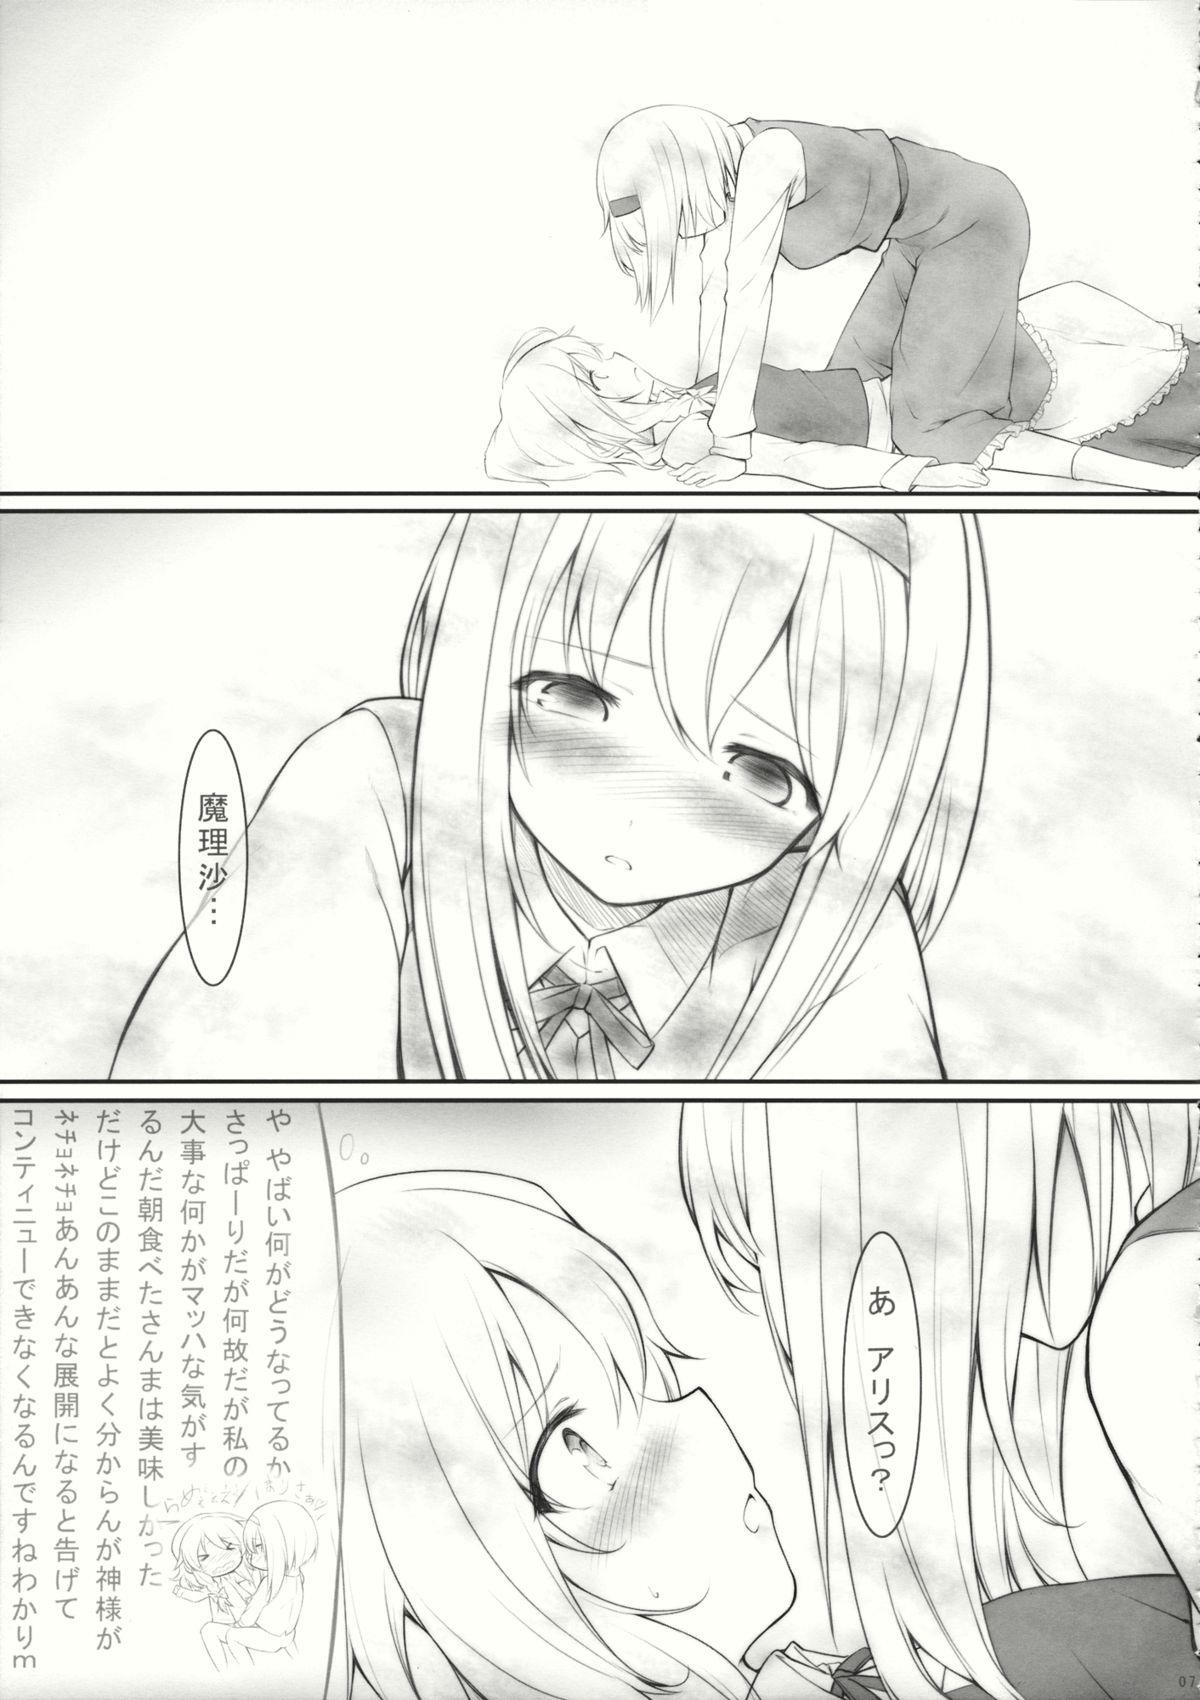 Married kiss or kiss? - Touhou project Bigbooty - Page 6